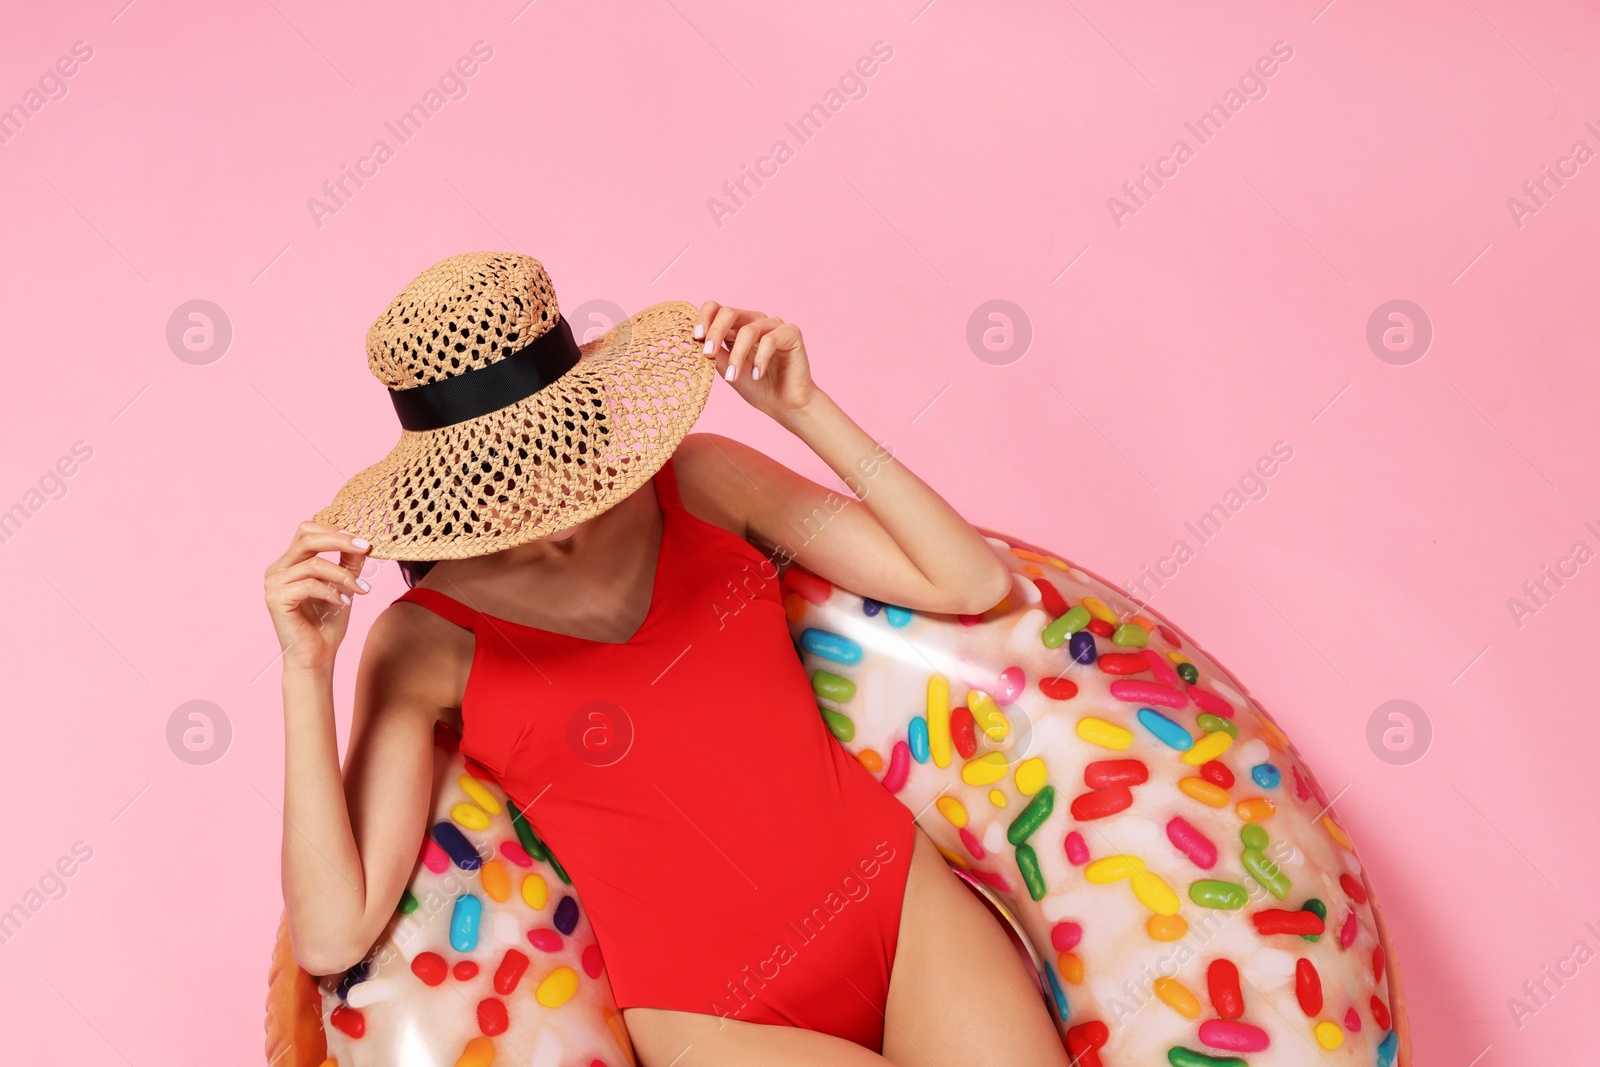 Photo of Young woman in stylish swimsuit on inflatable ring against pink background, top view